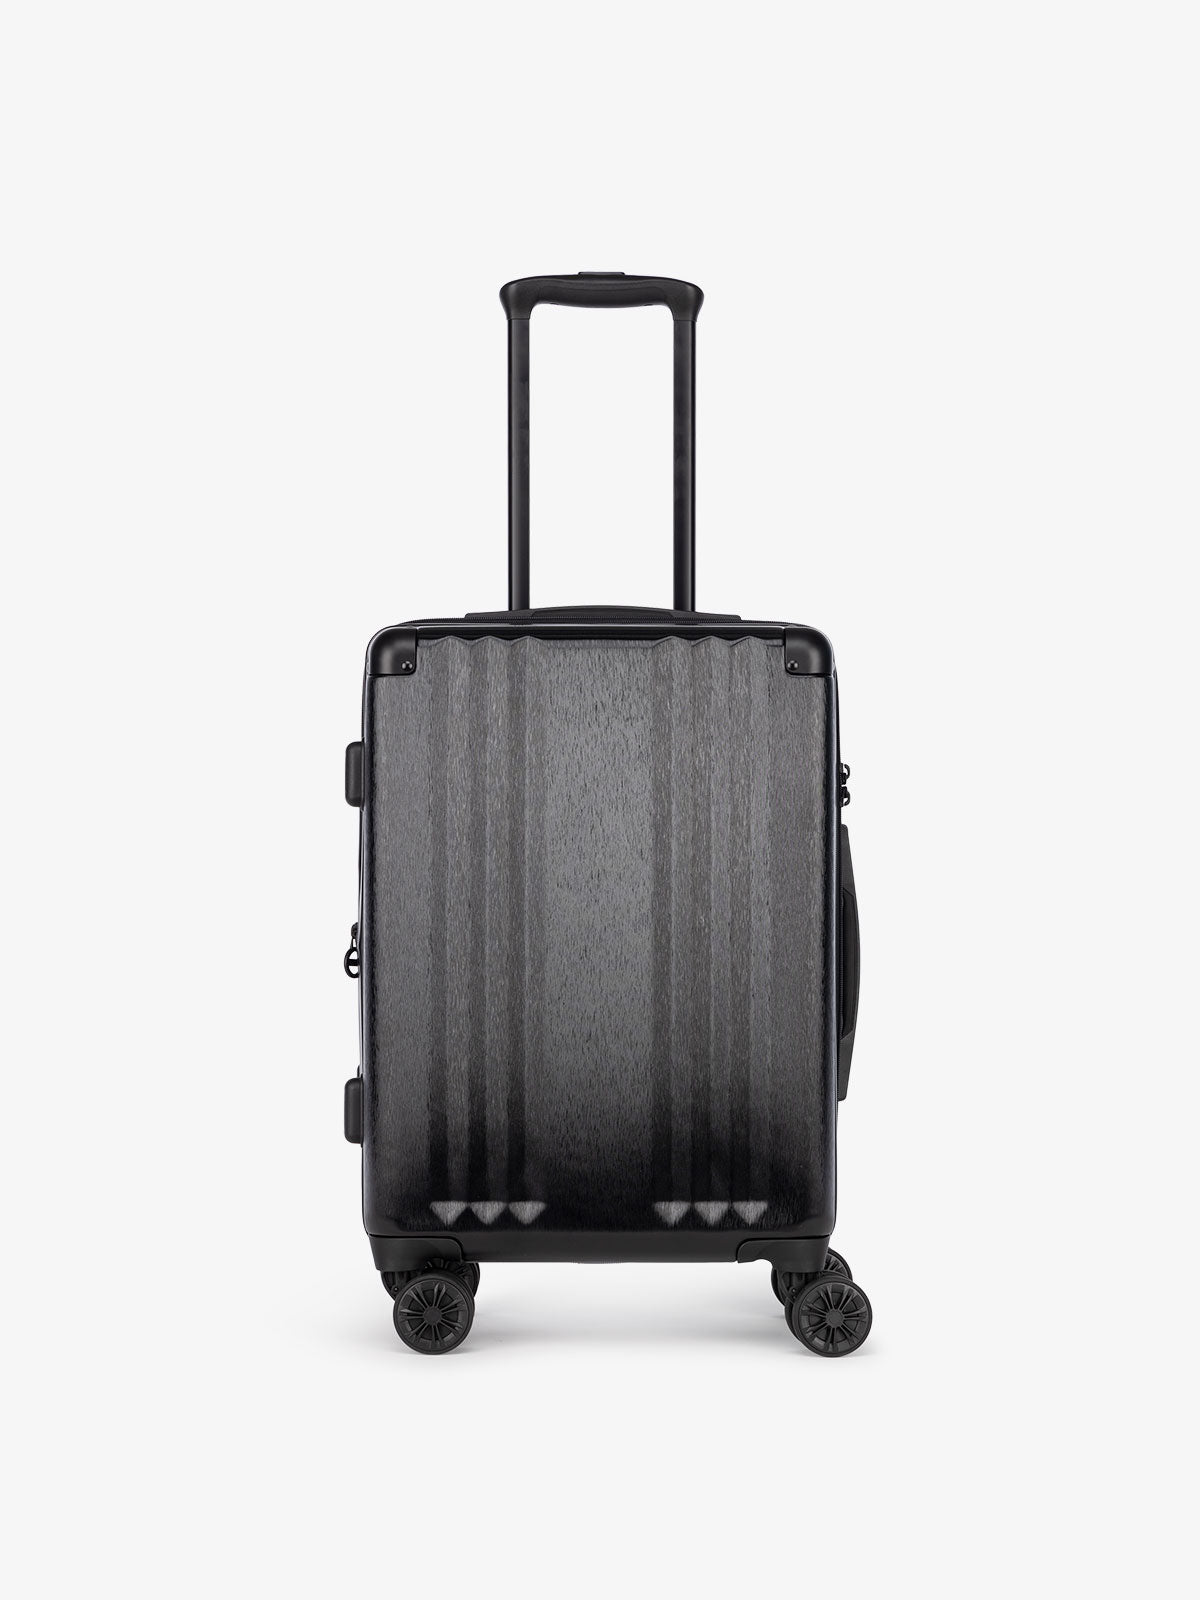 black CALPAK Ambeur hard shell rolling carry on suitcase as a part of a luggage set